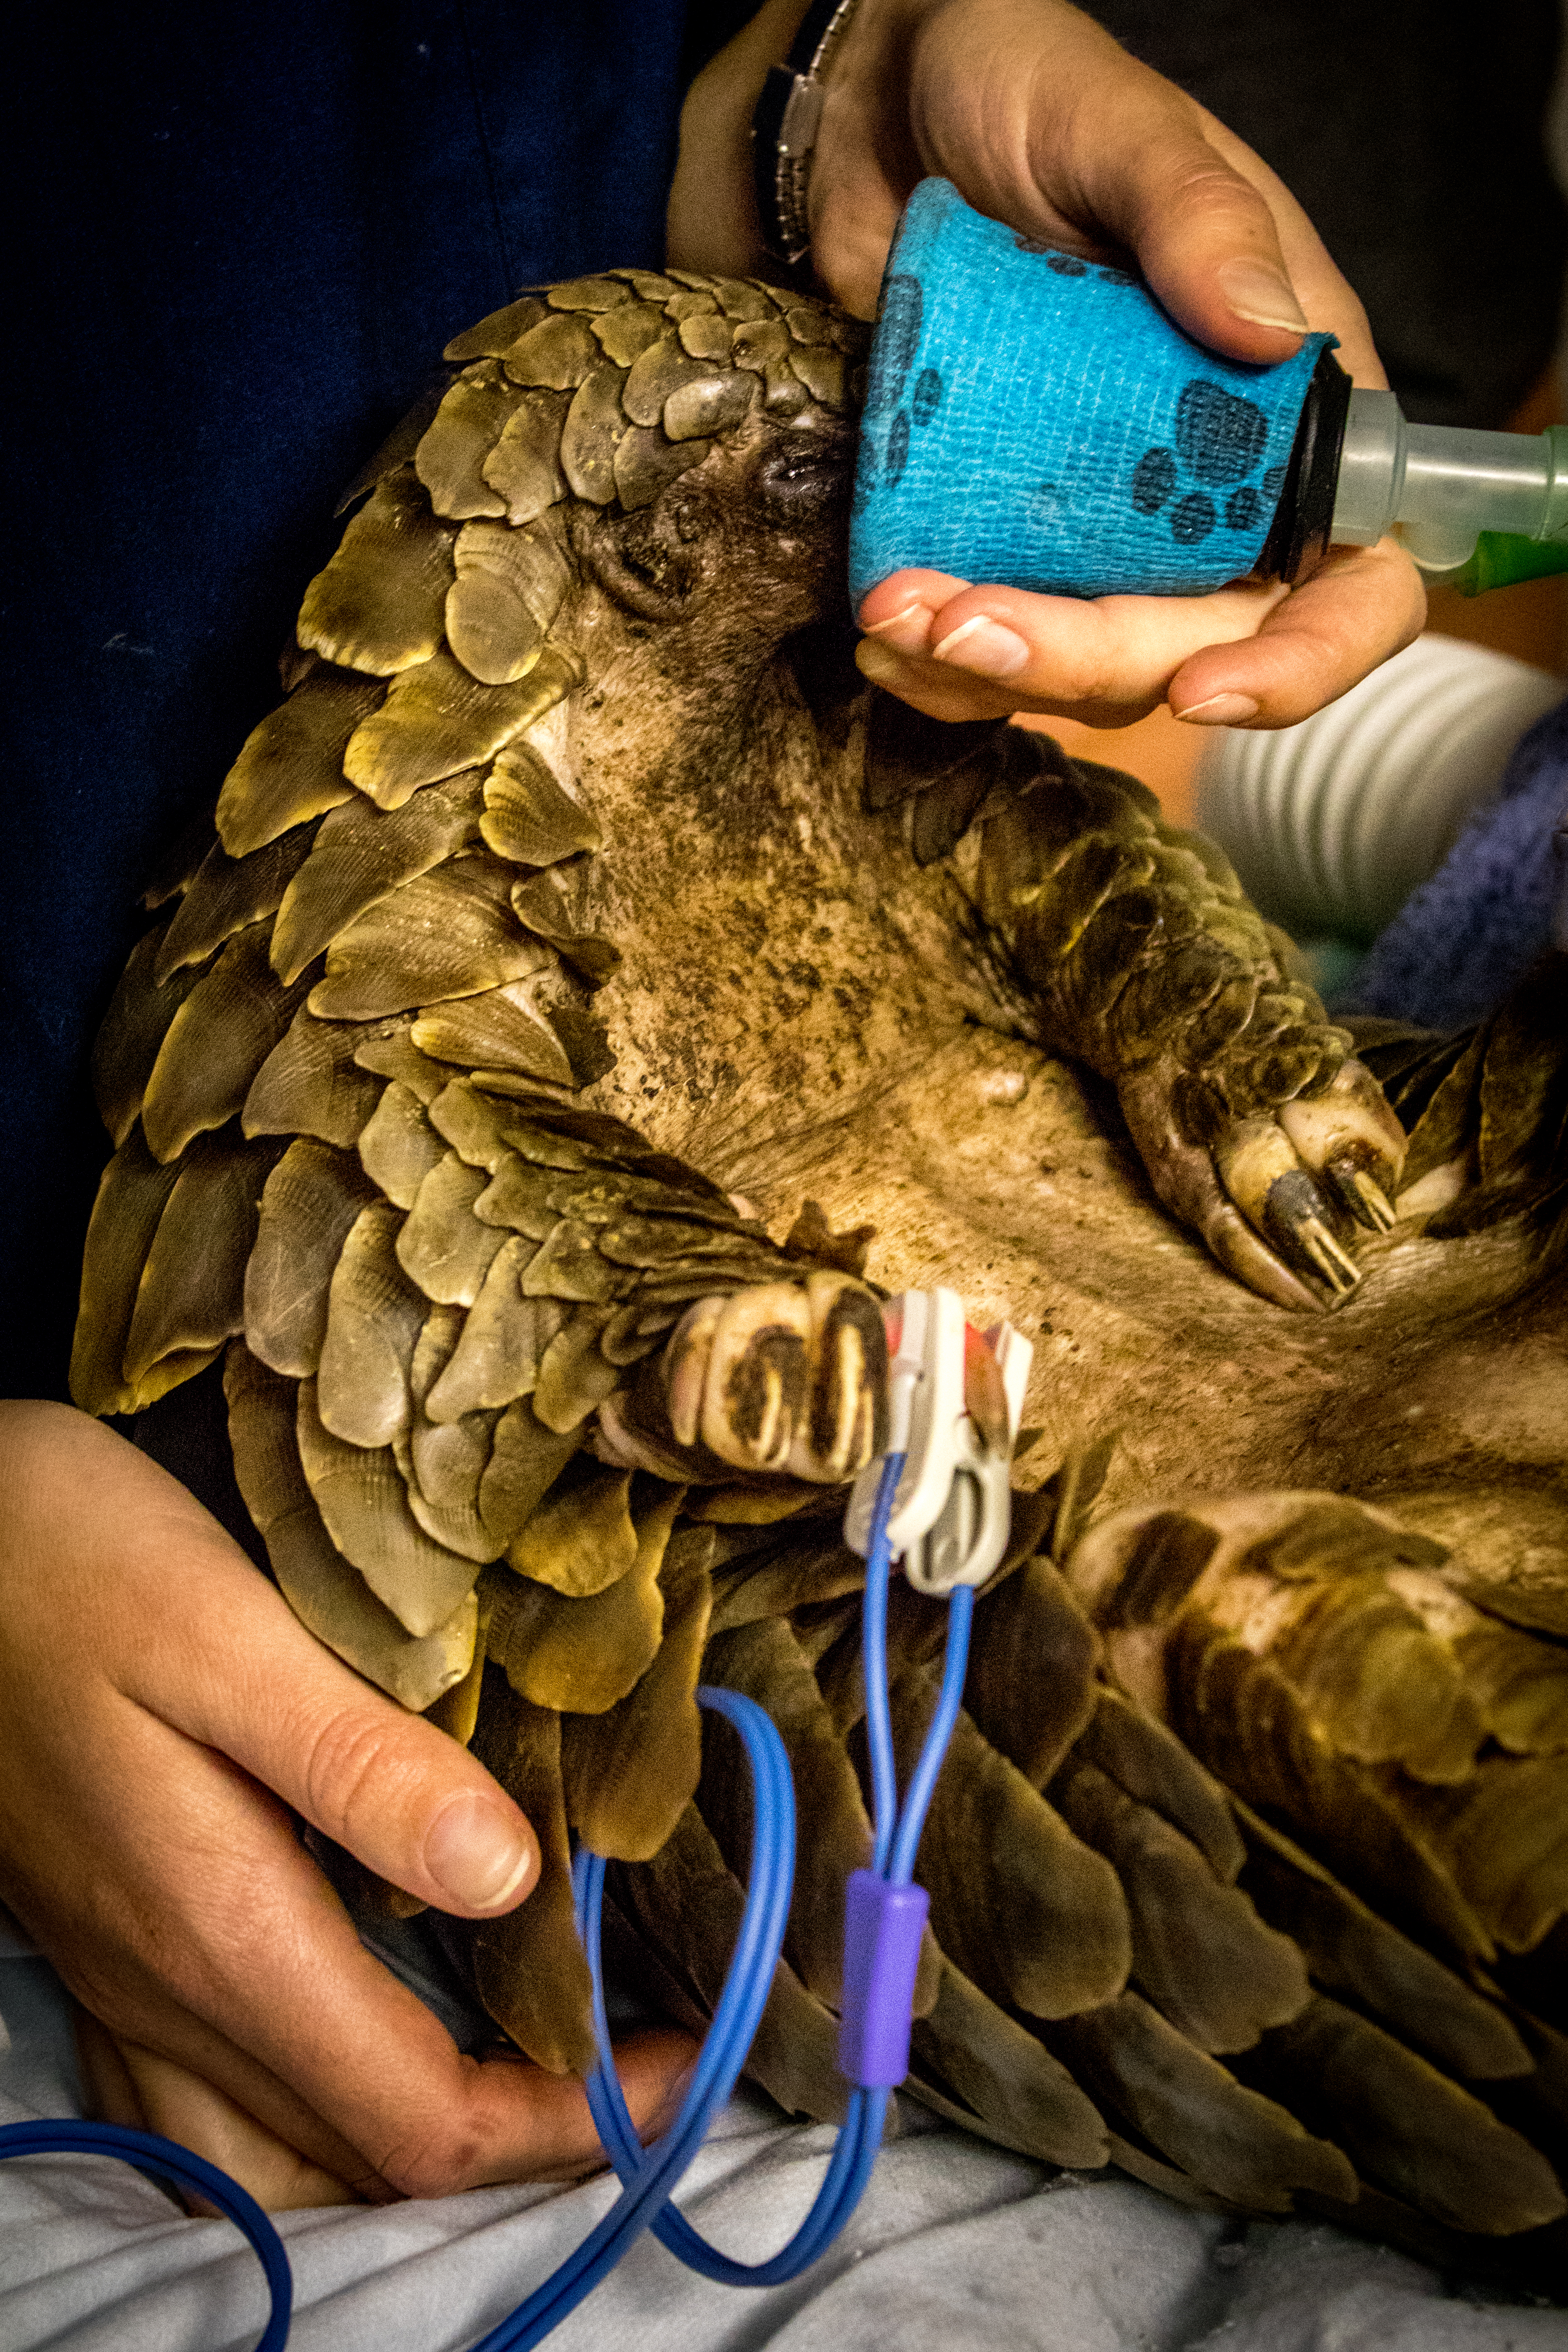 Fortunate the pangolin receiving a blood transfusion